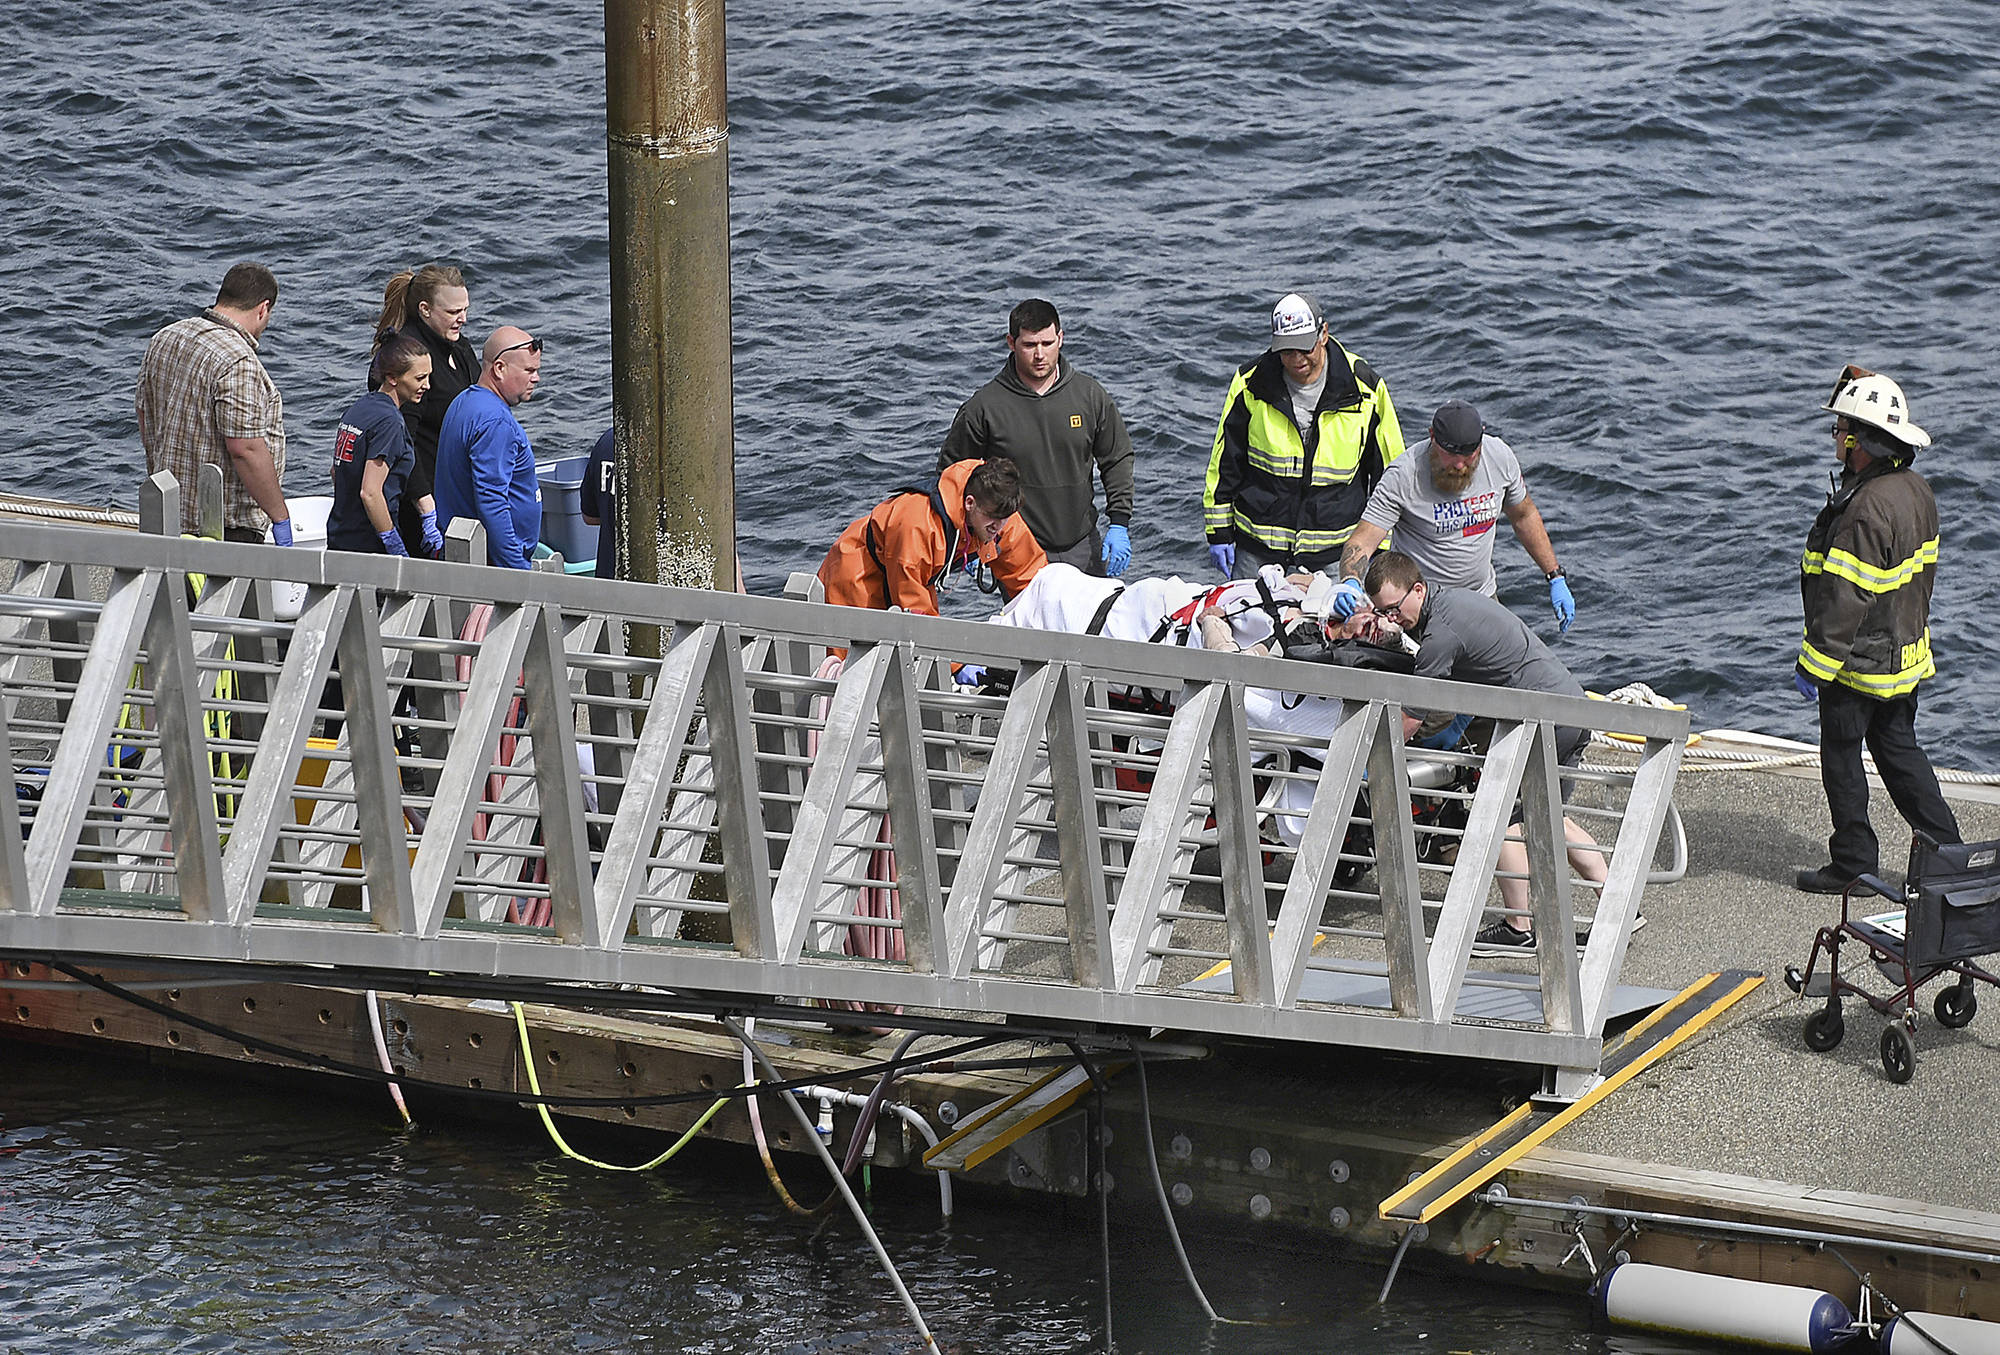 Emergency response crews transport an injured passenger to an ambulance at the George Inlet Lodge docks, Monday, May 13, 2019, in Ketchikan, Alaska. The passenger was from one of two float planes reported down in George Inlet early Monday afternoon and was dropped off by a U.S. Coast Guard 45-foot response boat. (Dustin Safranek | Ketchikan Daily News via AP)